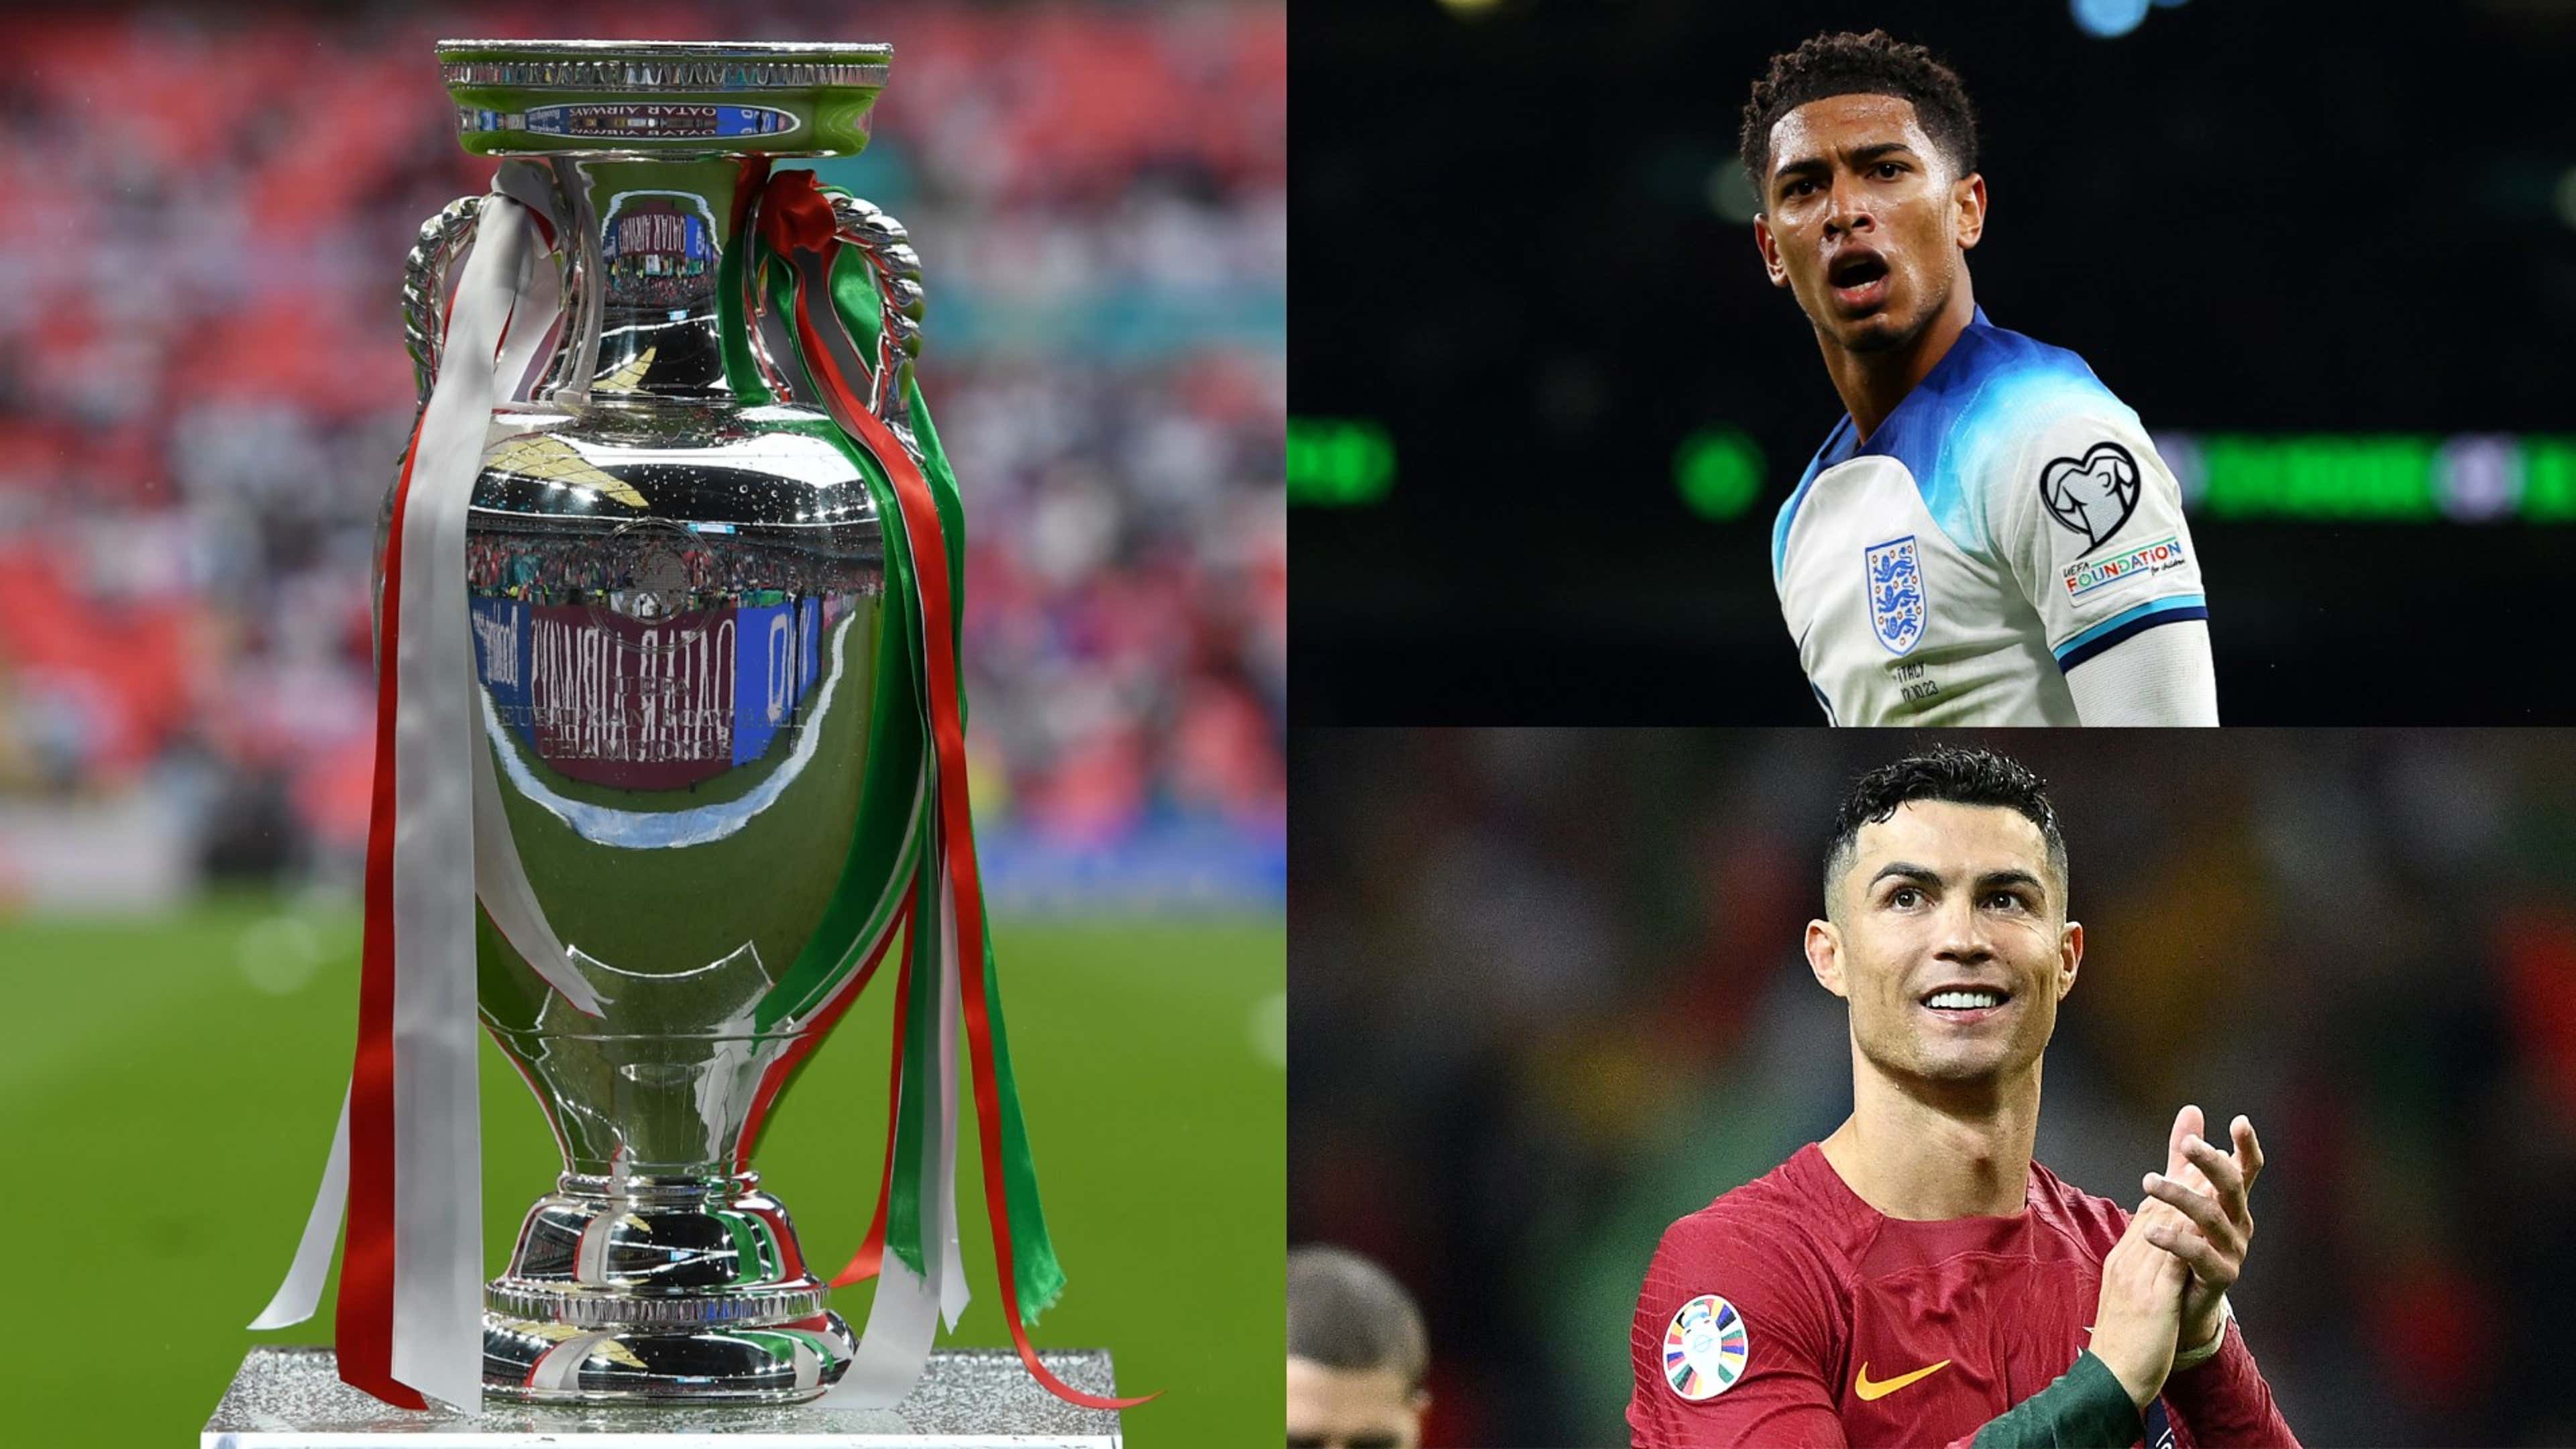 Euro 2024 draw seeding pots: How European Championship group stage is  shaping up